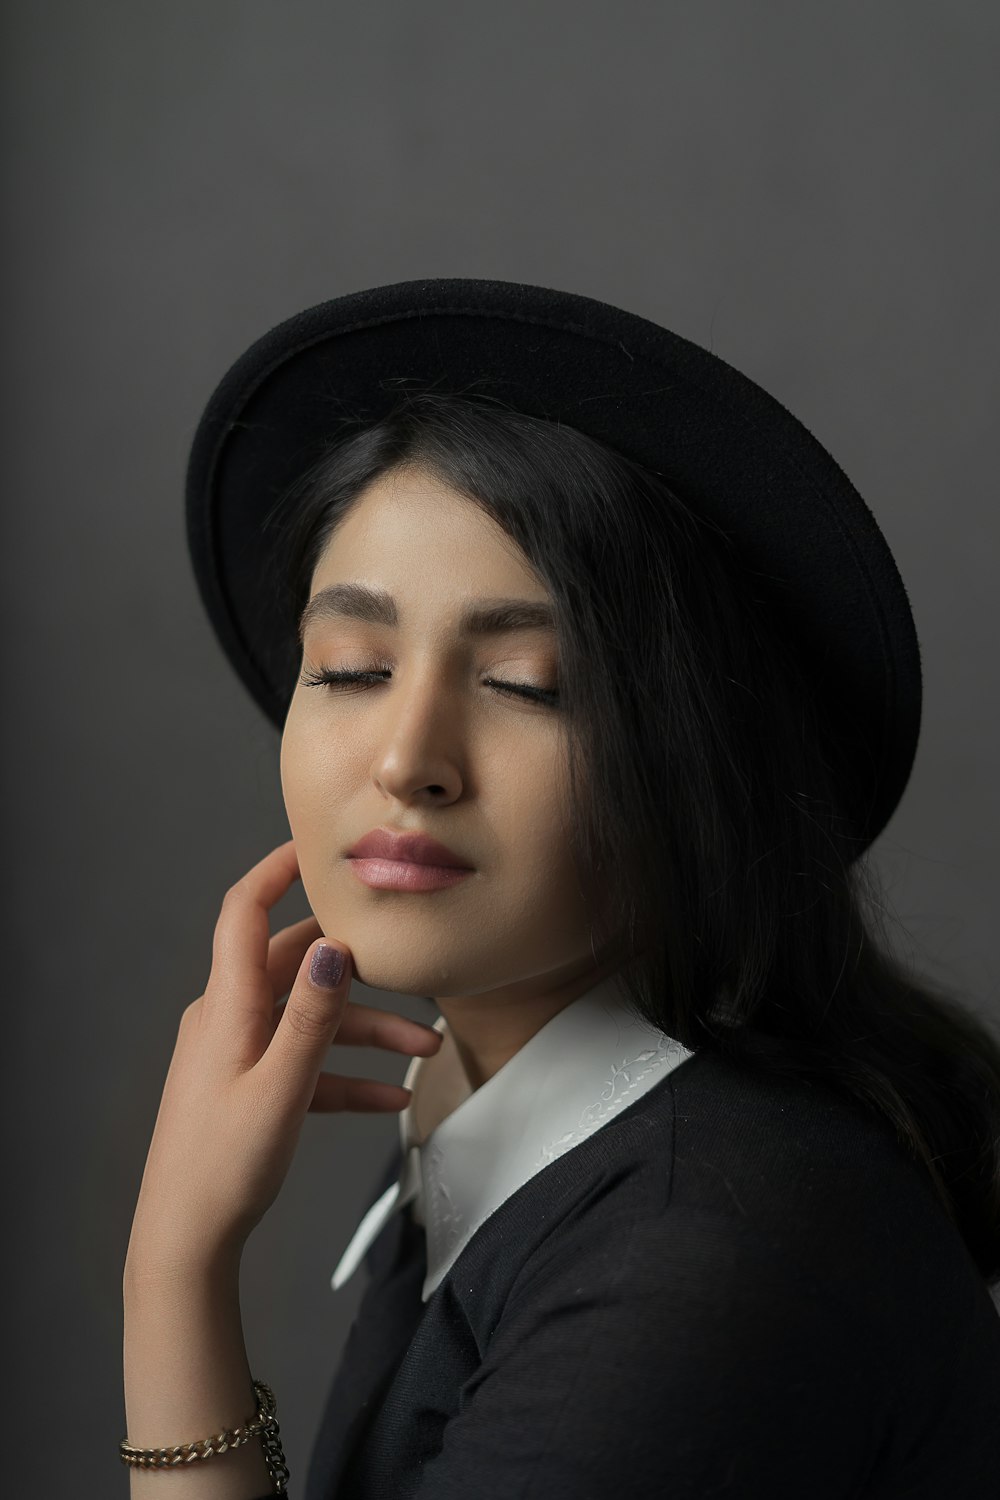 a woman wearing a black hat with her eyes closed